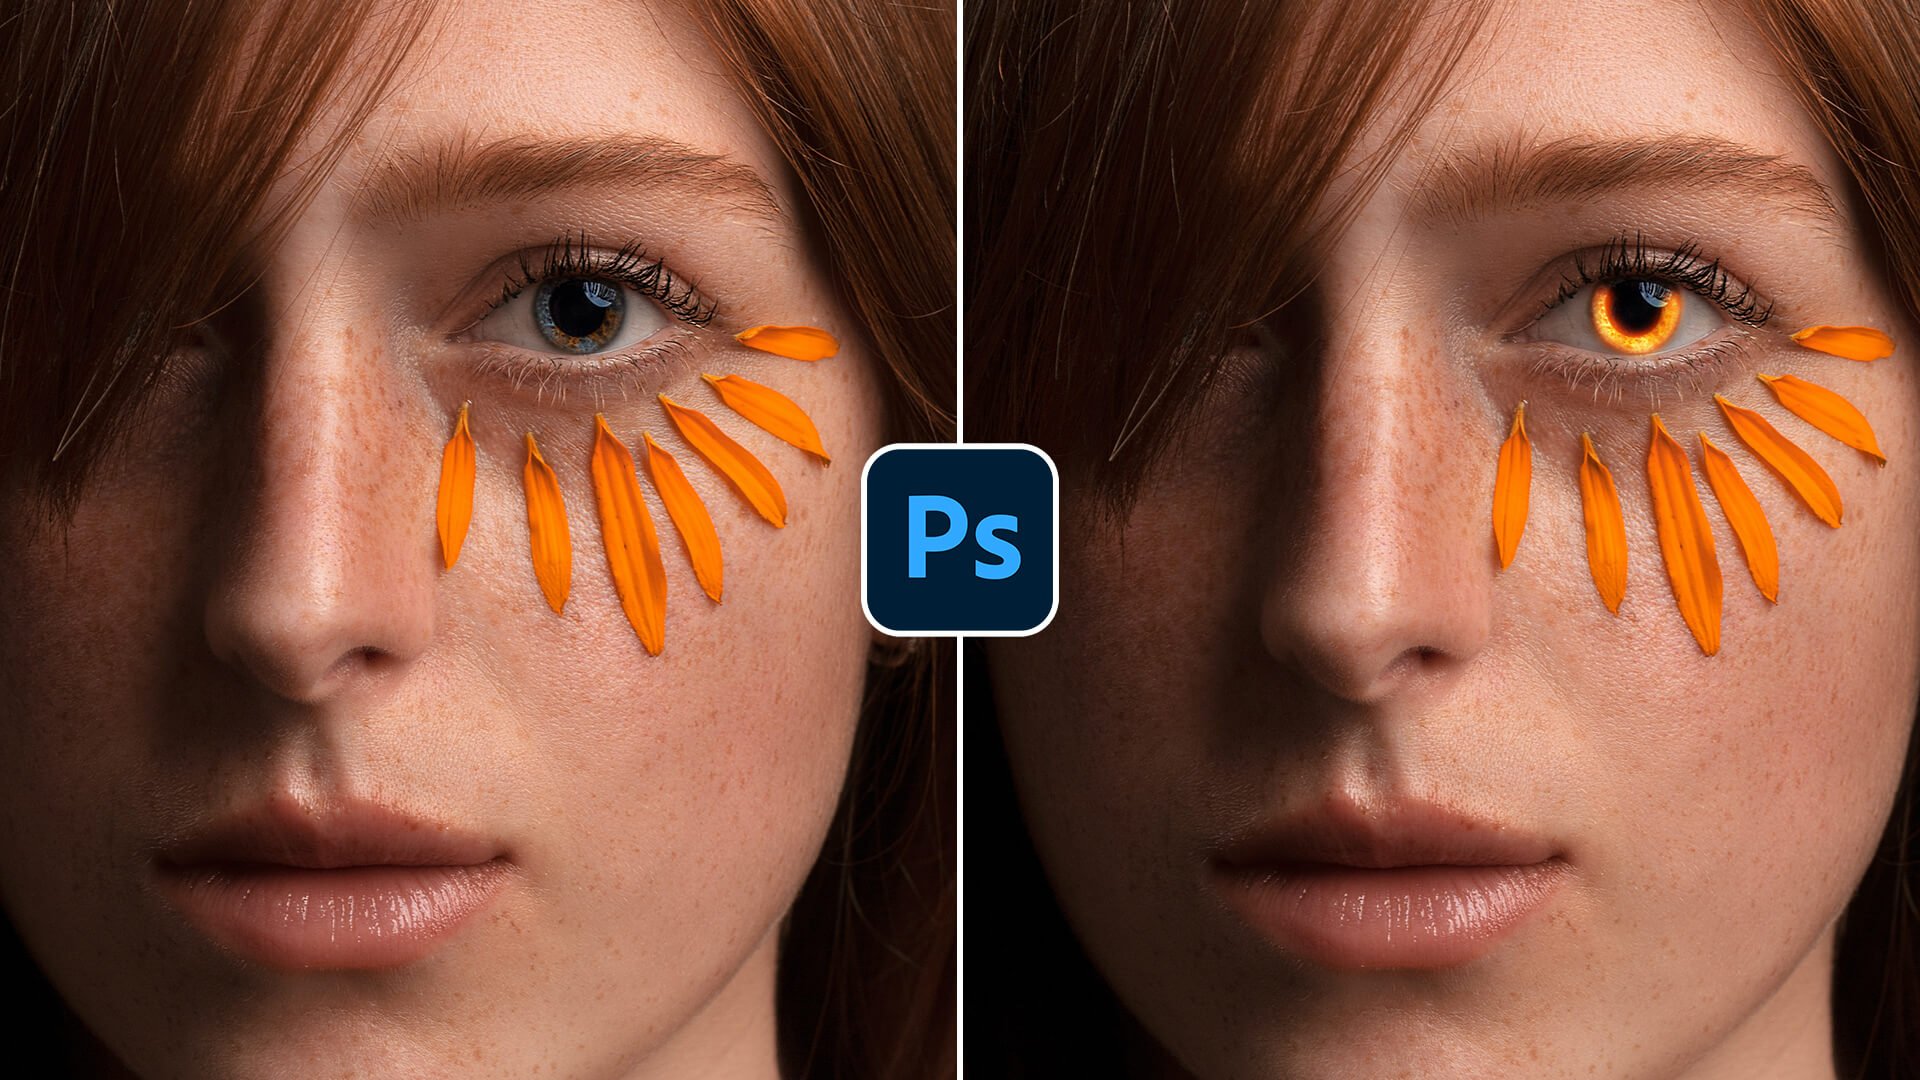 How to Make Glow Effect in Photoshop